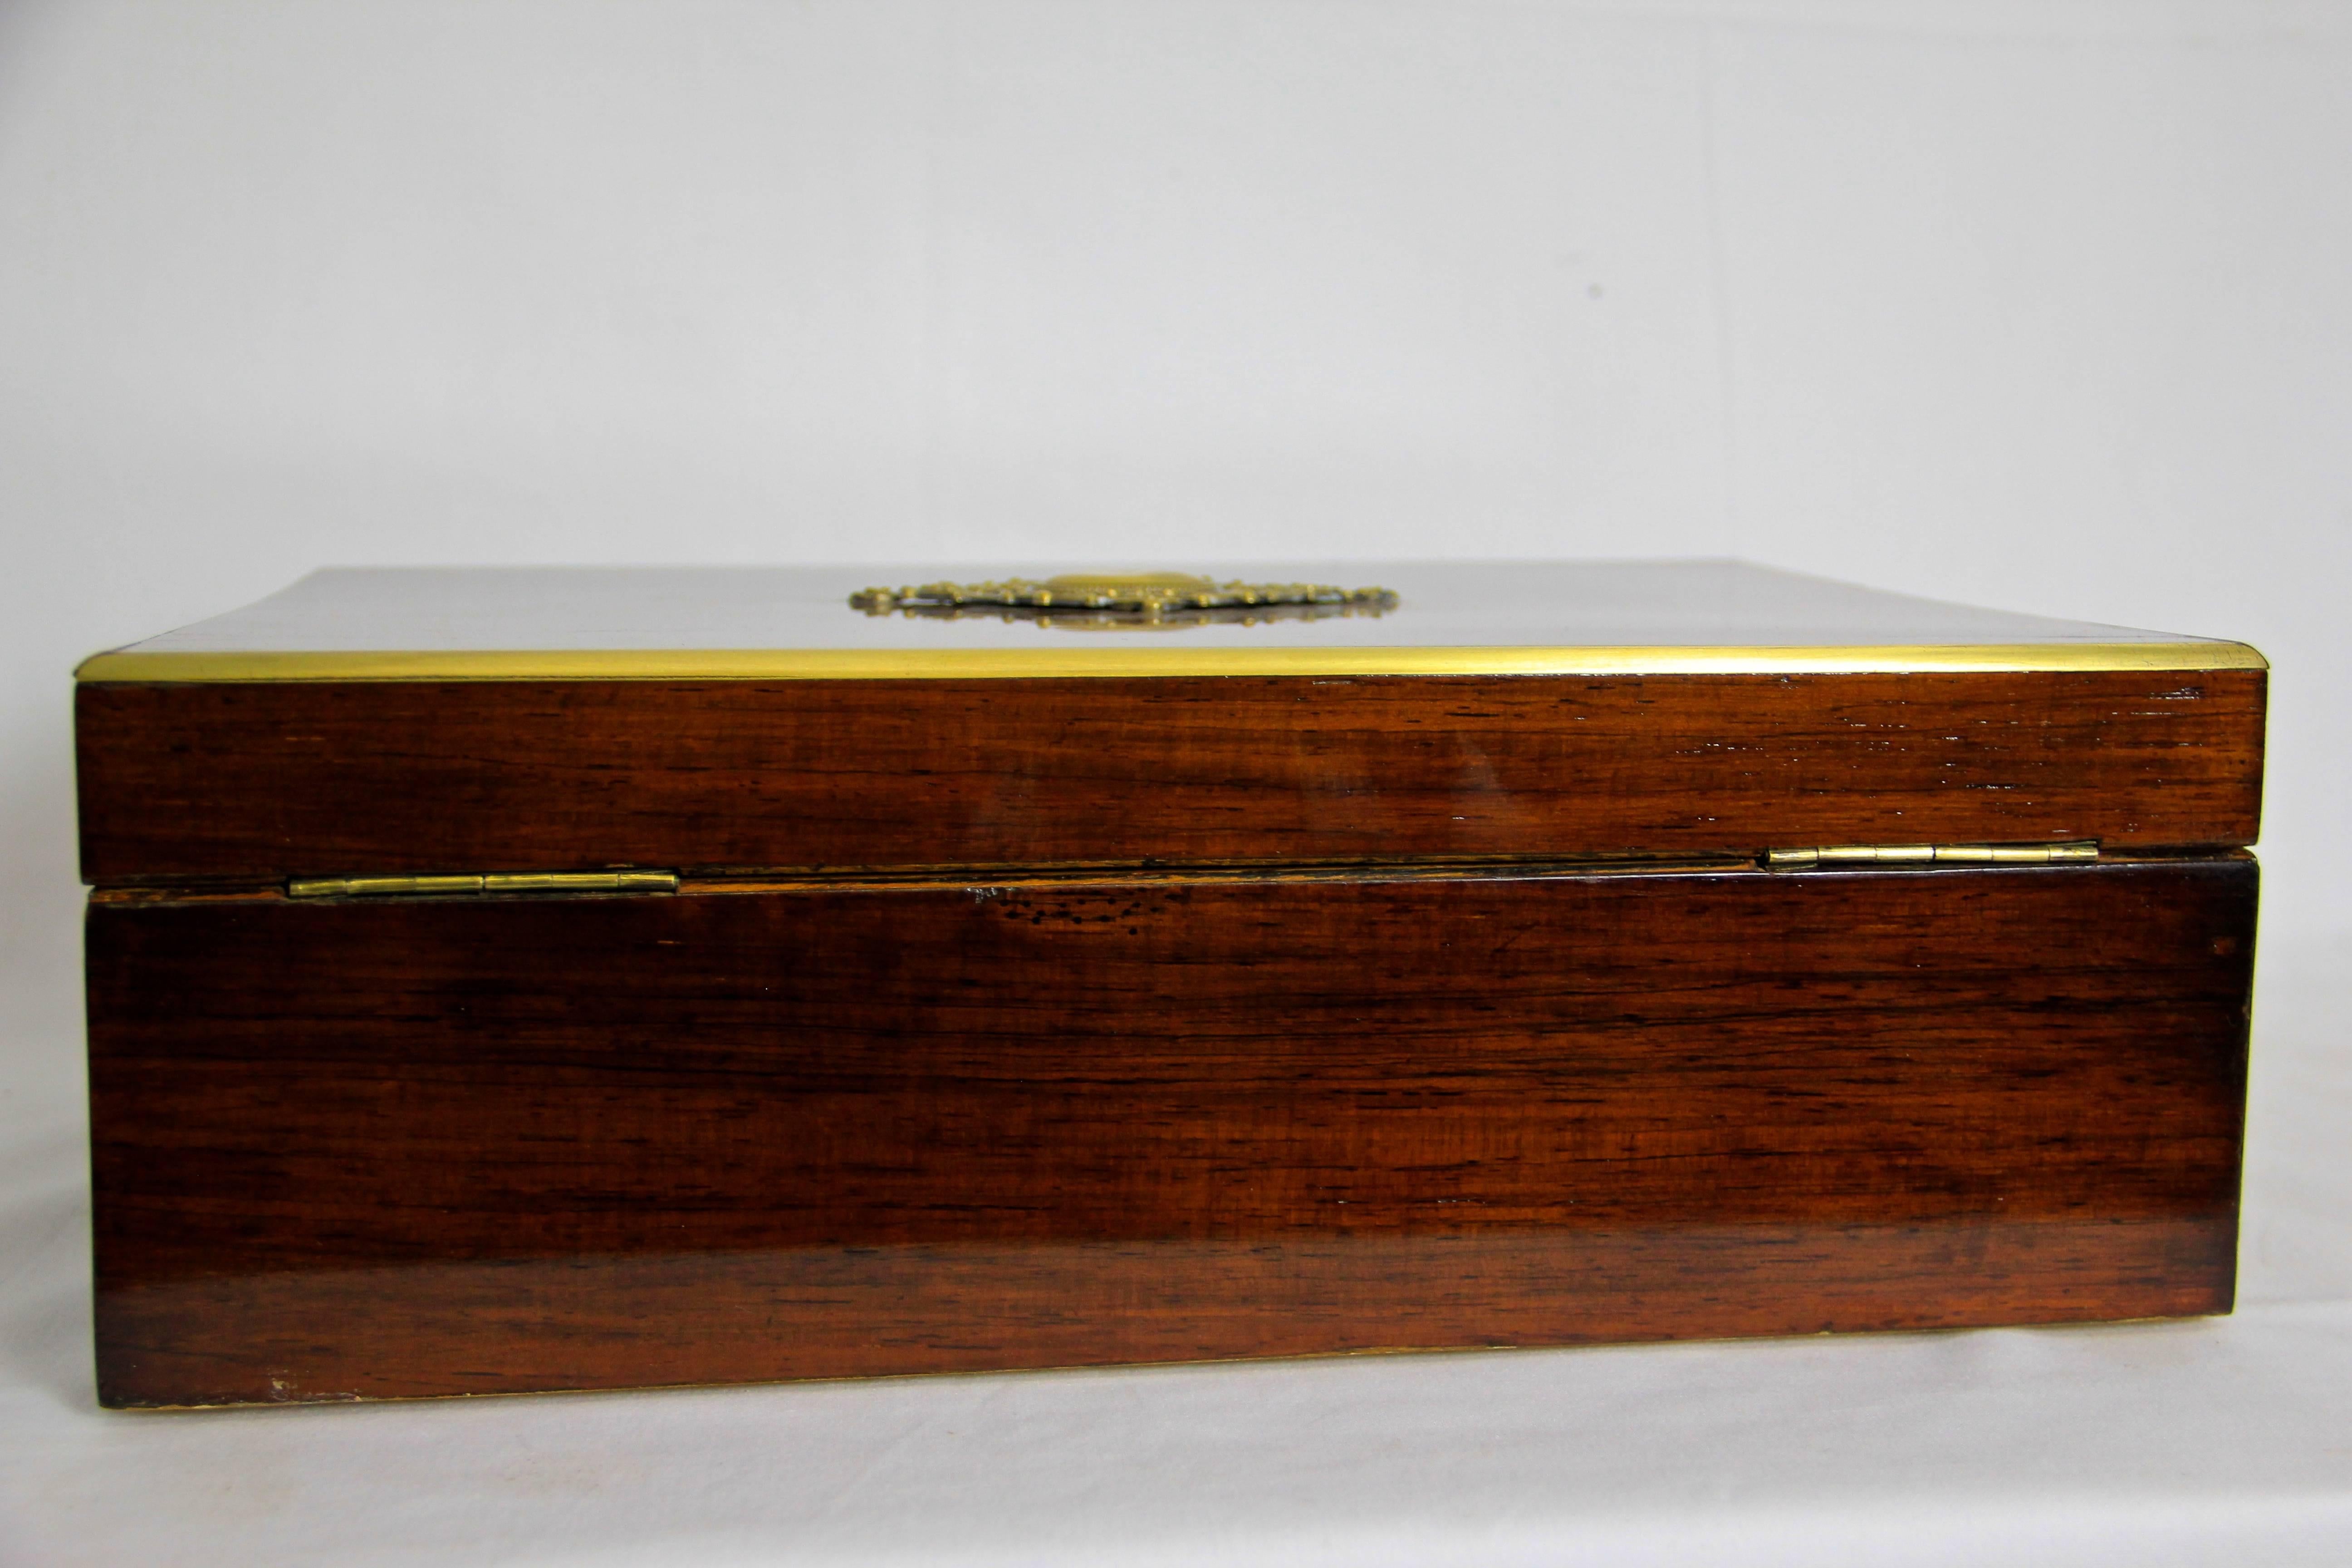 20th Century Art Nouveau Rosewood Box with Brass Applications, circa 1900